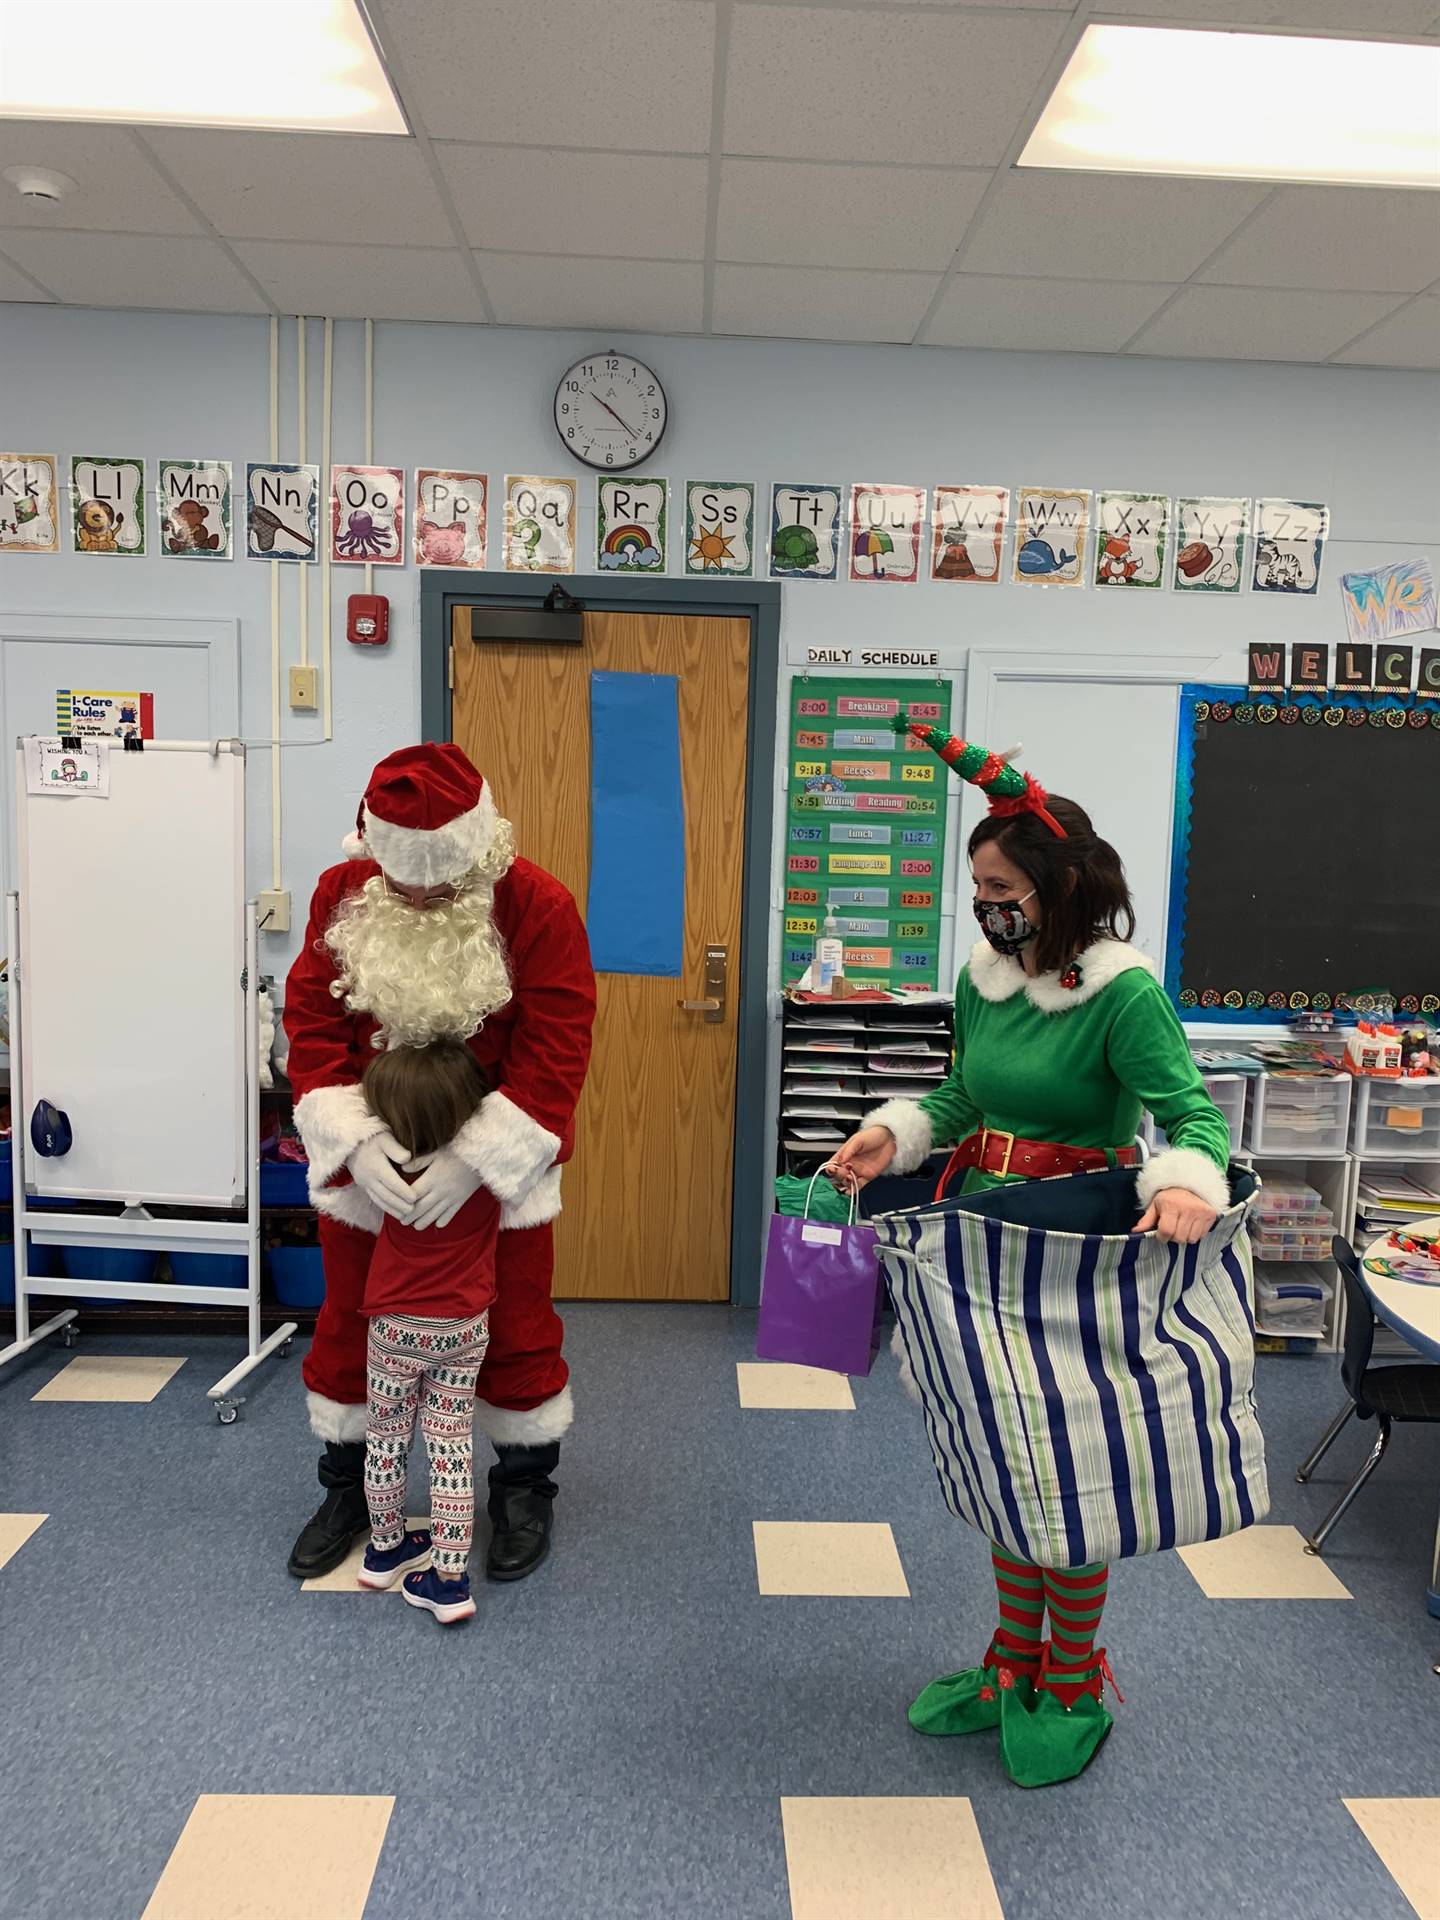 a student hugs Santa with Elf standing by.